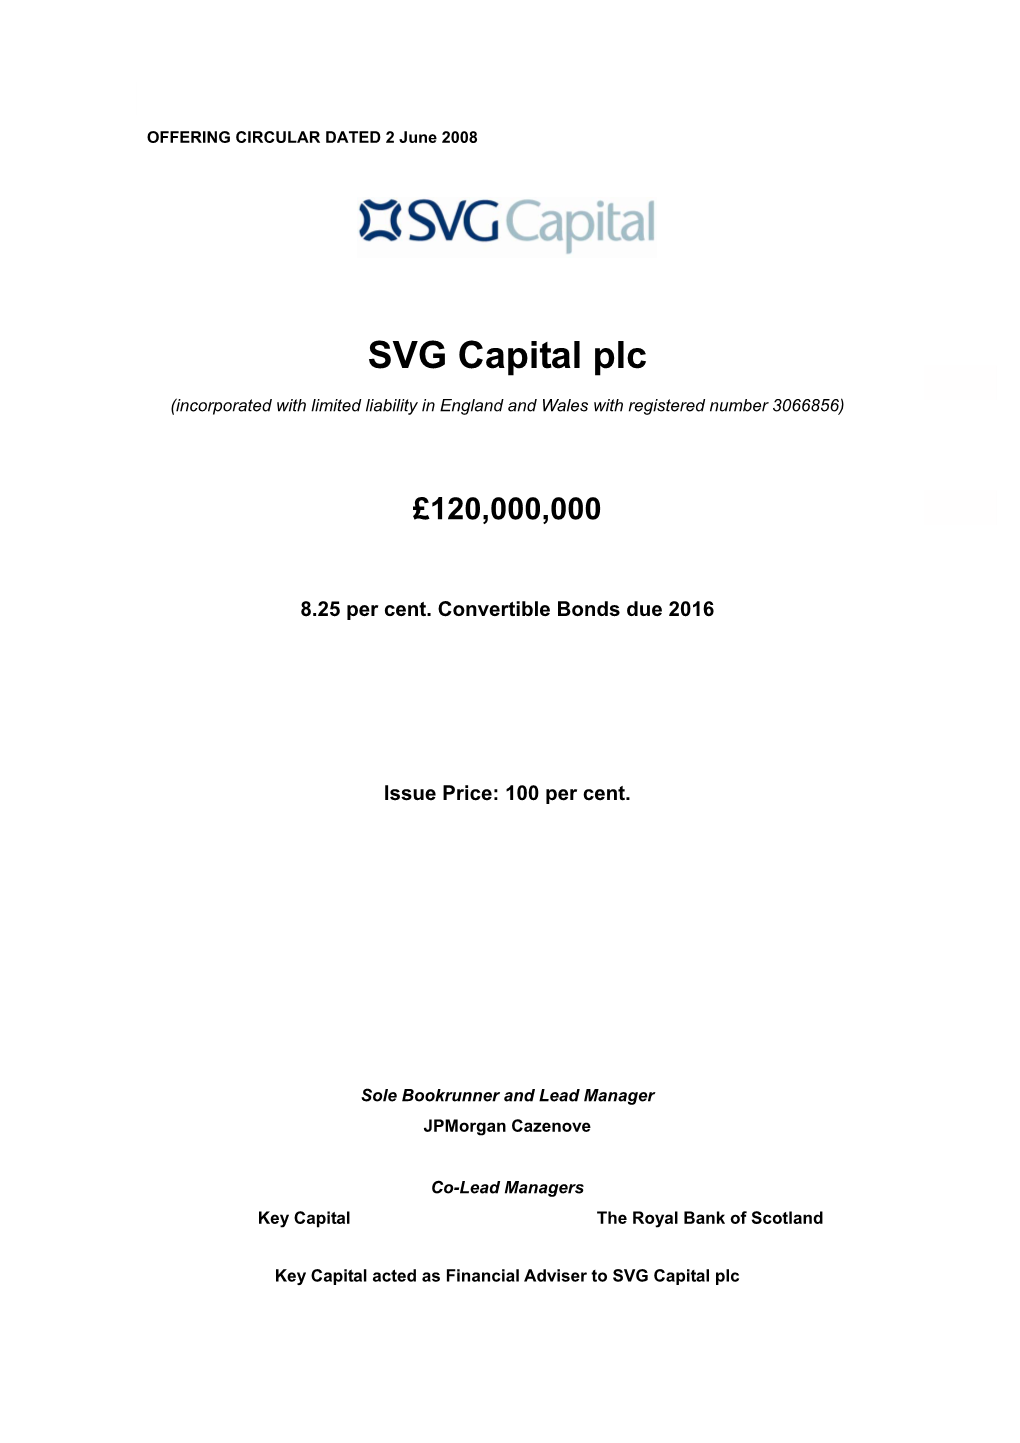 SVG Capital Plc (Incorporated with Limited Liability in England and Wales with Registered Number 3066856)